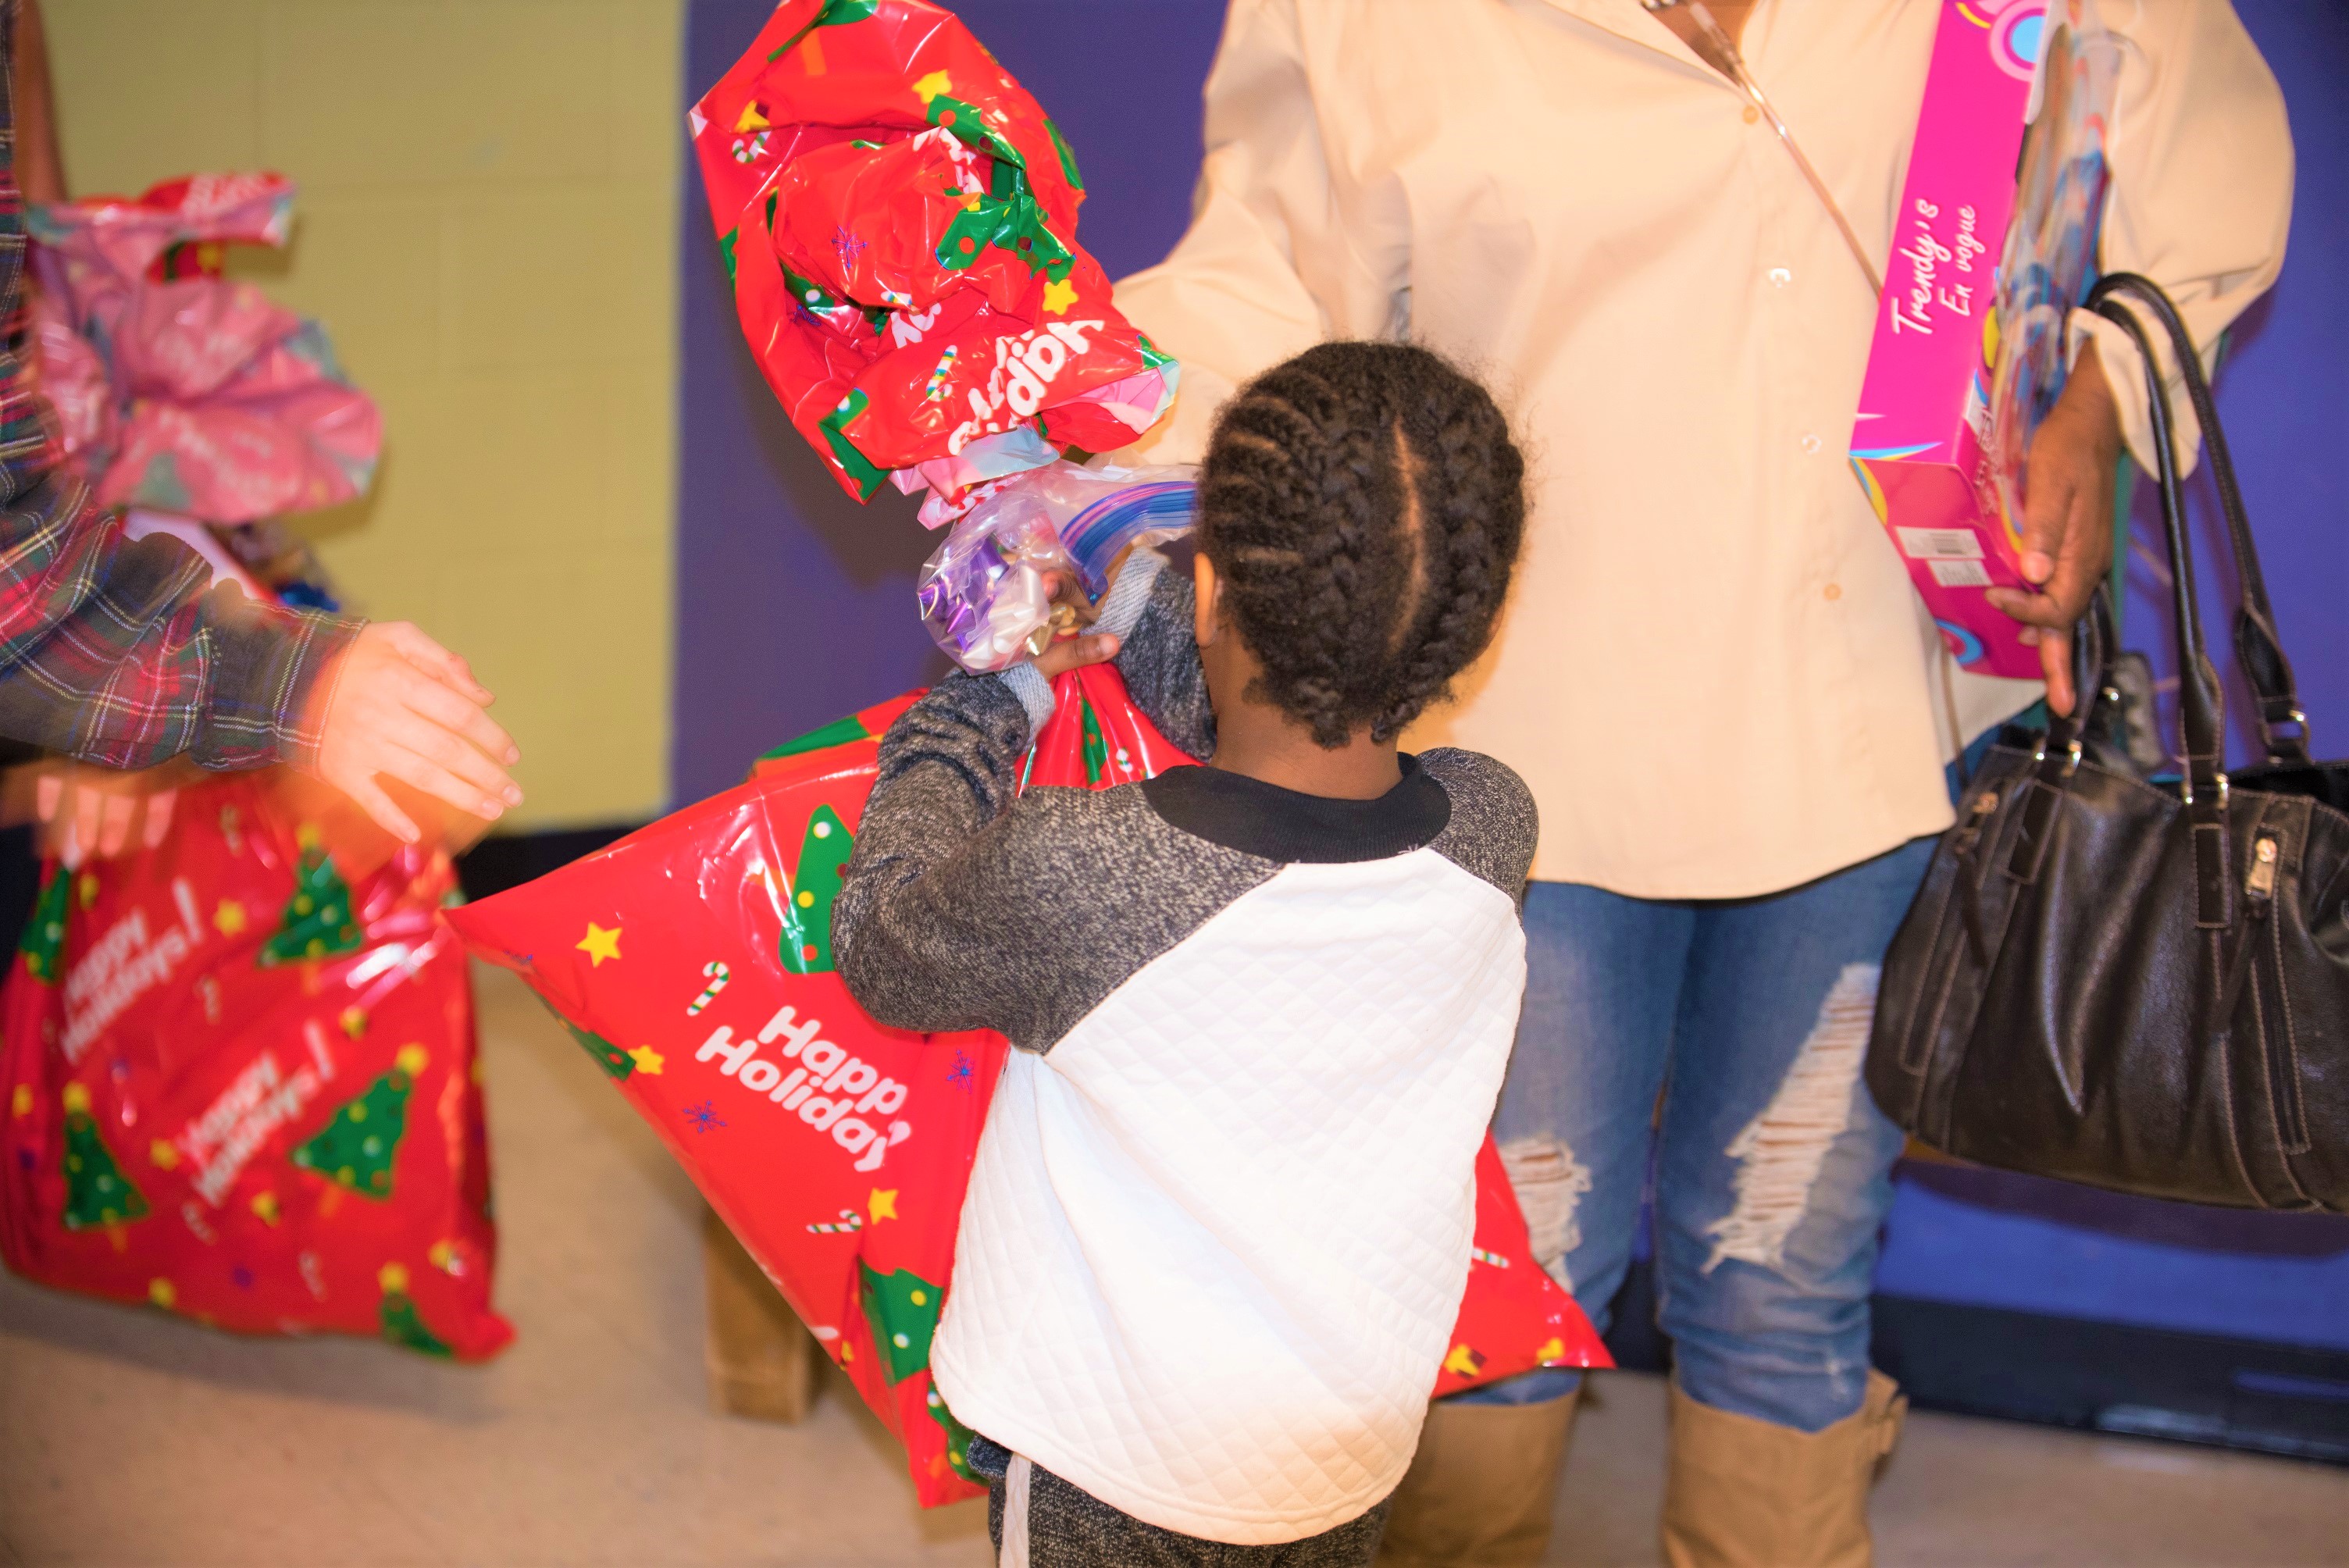 H.E.R.O. for Children participant received wrapped gift